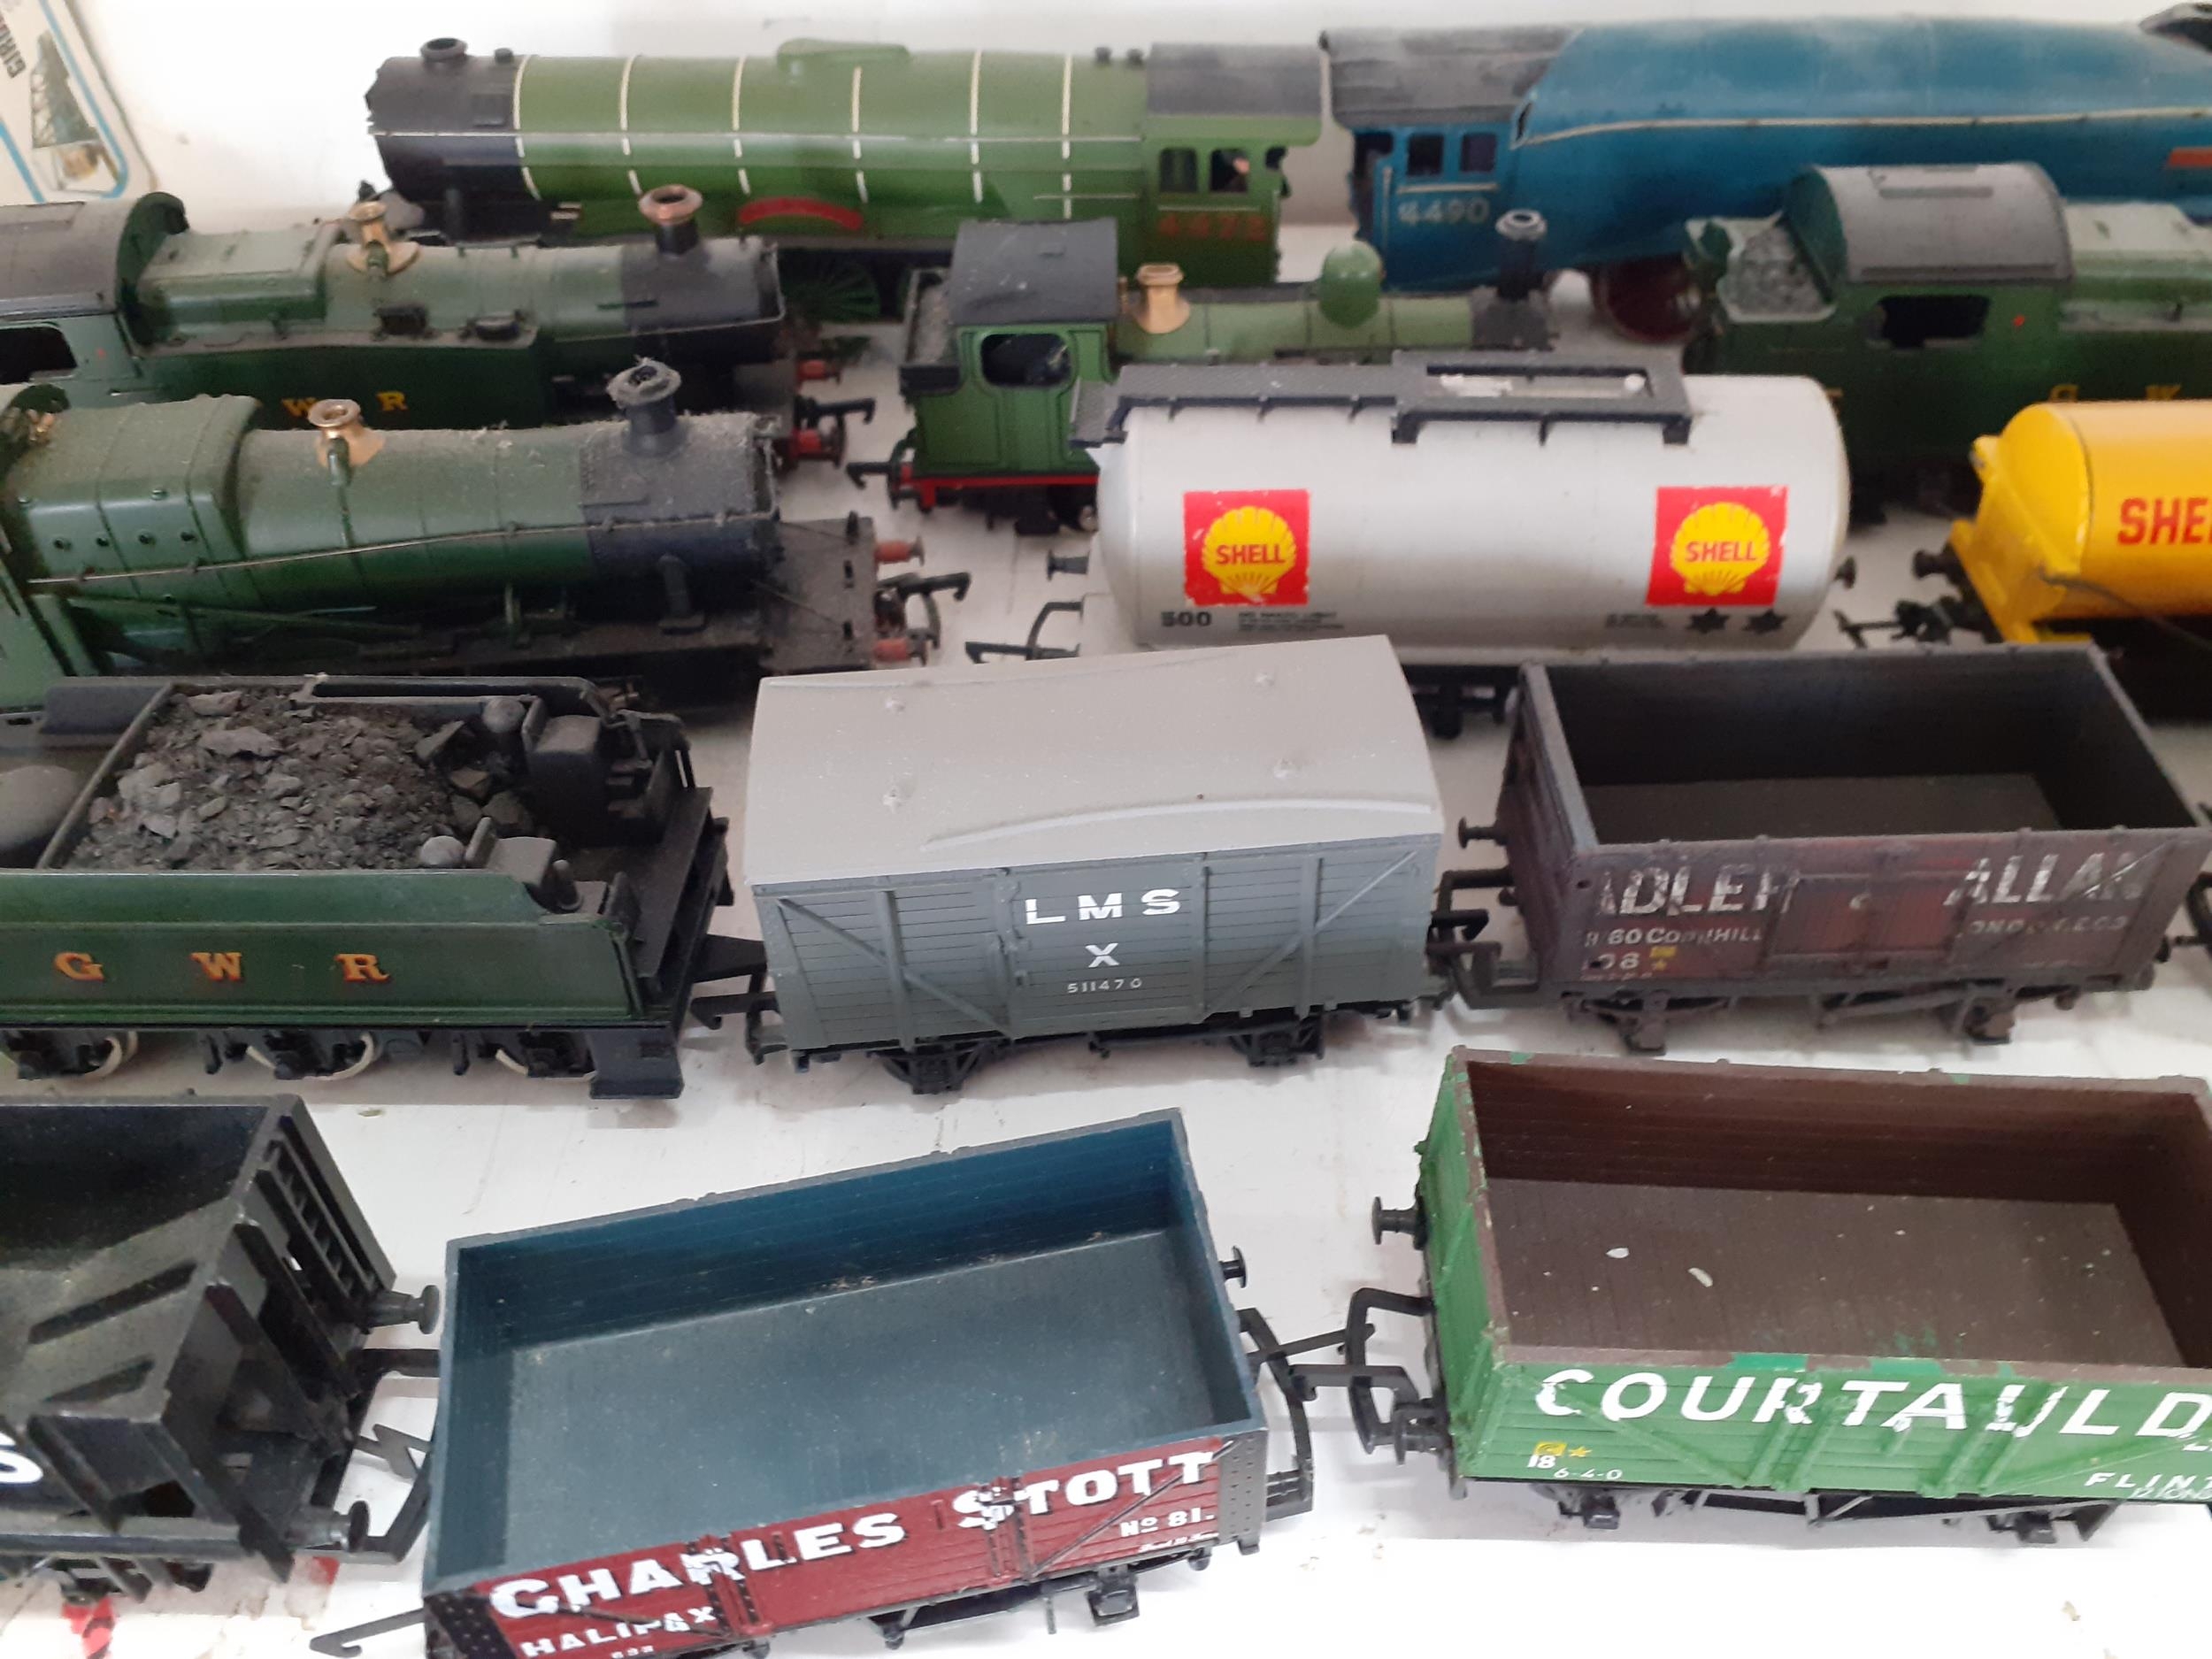 A quantity of model railway engines, and rolling stock to include Empire of India, North Eastern, - Image 2 of 8